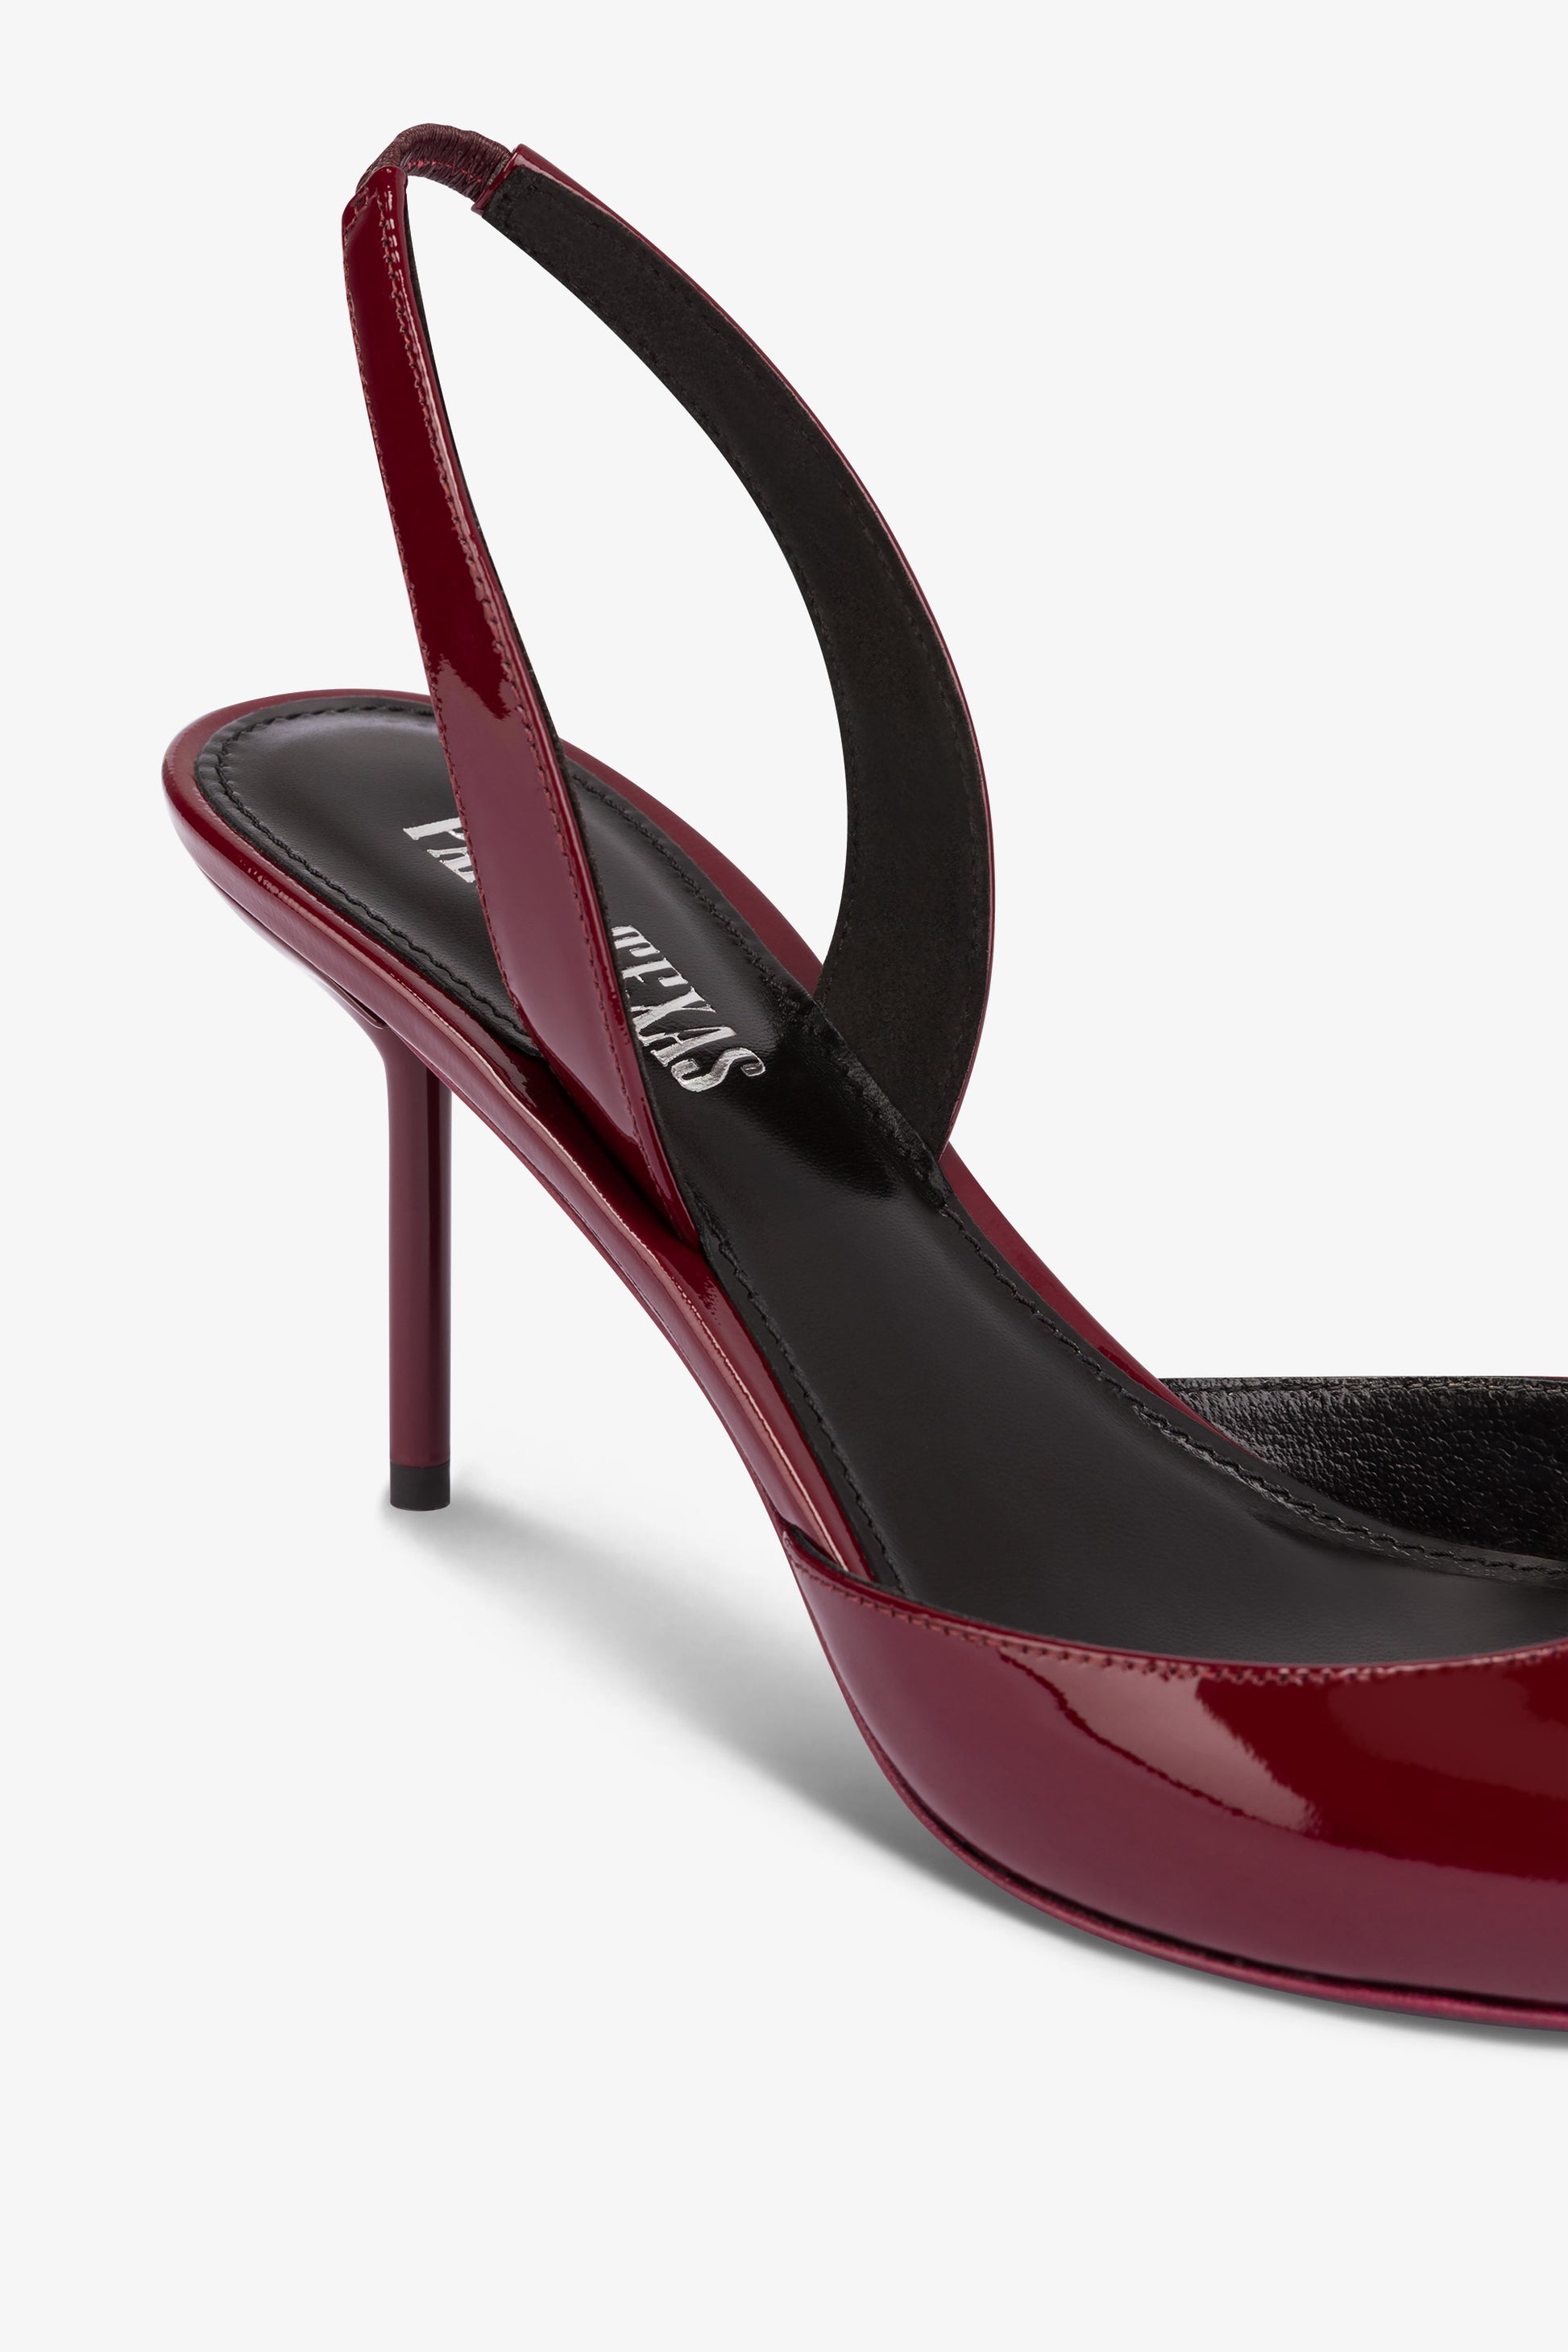 Long, pointed slingbacks in patent rouge noir leather